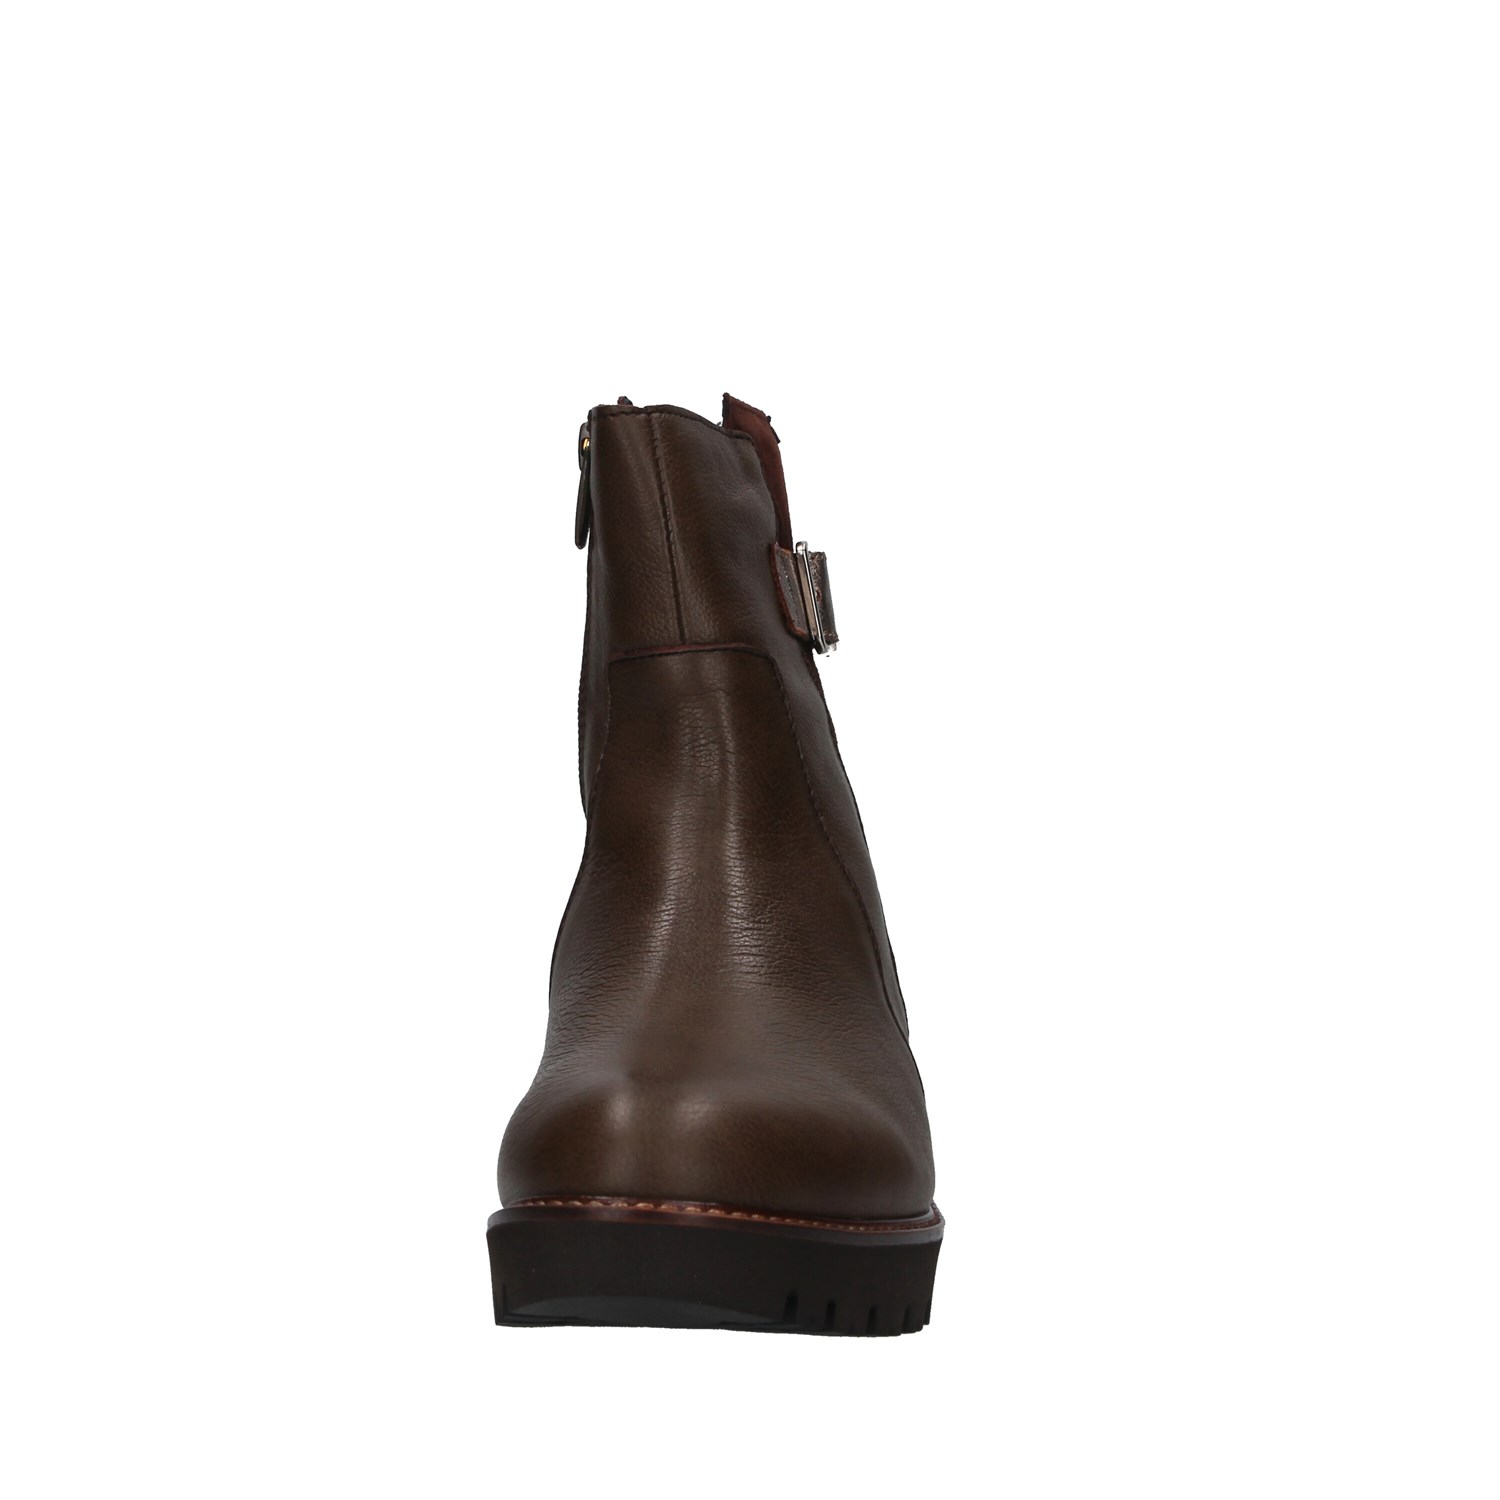 Callaghan 13446 BROWN Shoes Woman